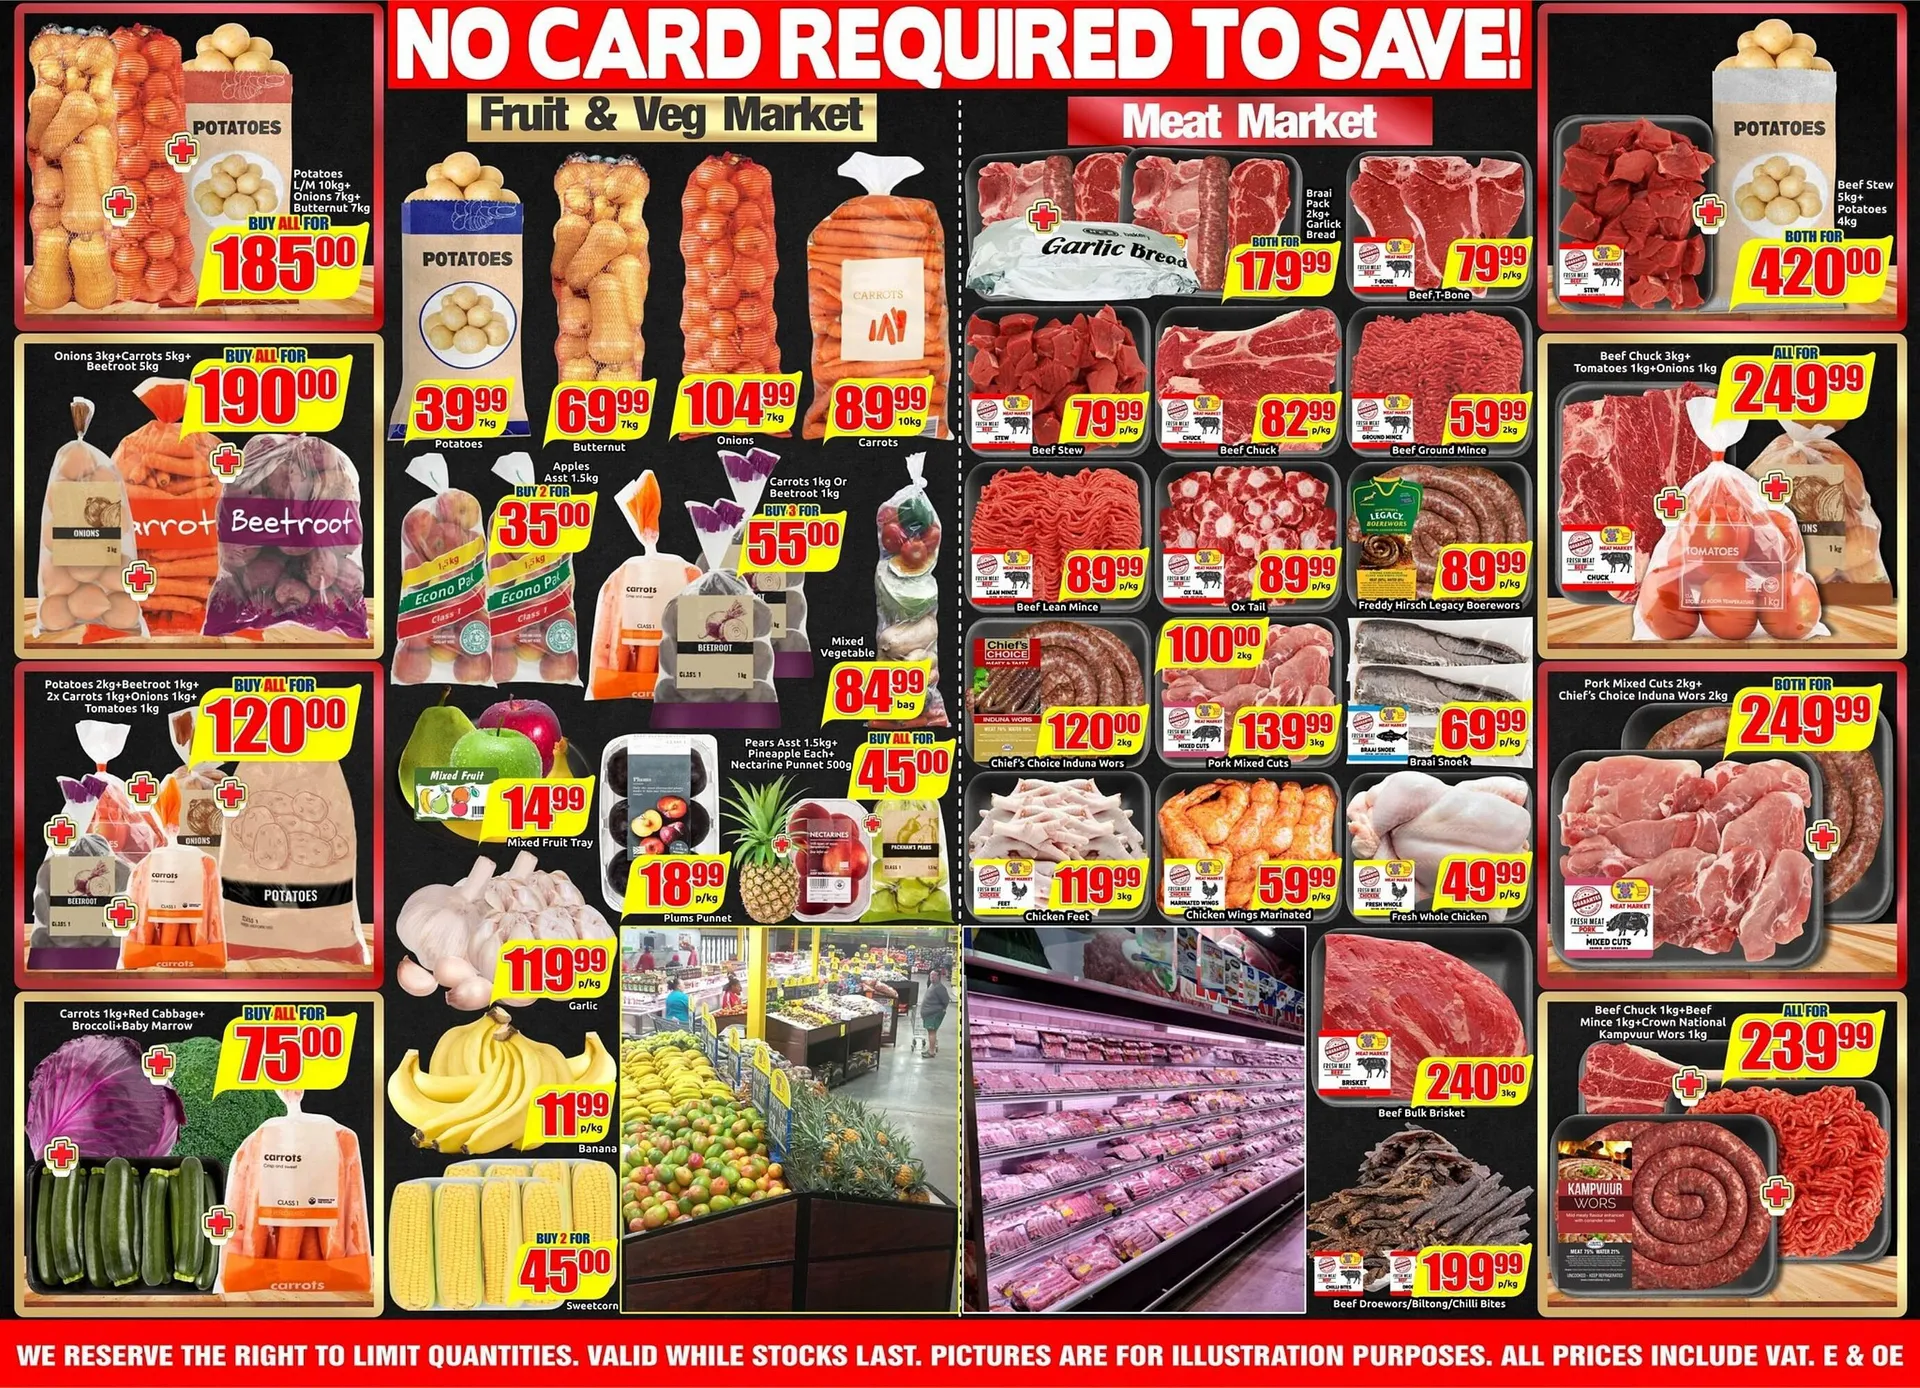 Three Star Cash and Carry catalogue - 5